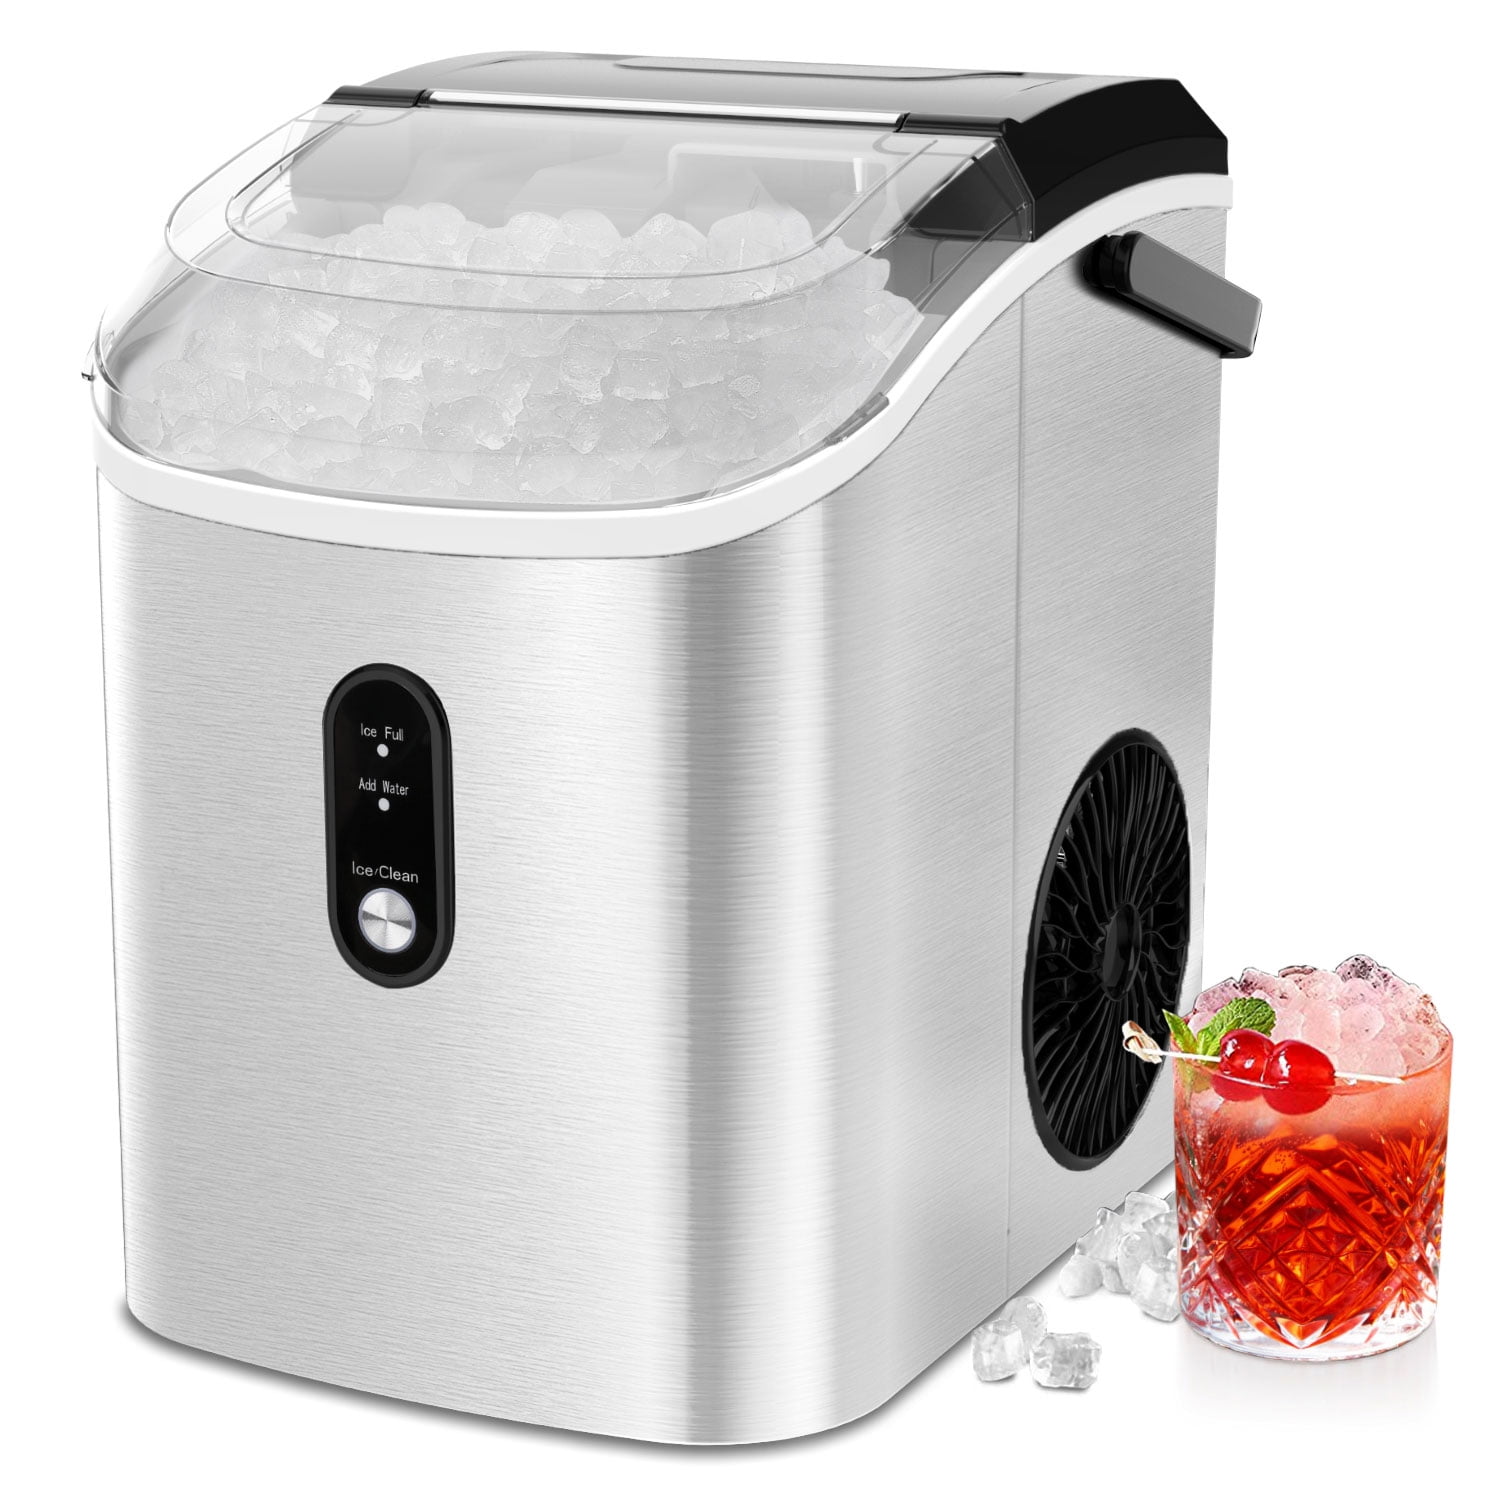 COWSAR Nugget Ice Maker, Portable Countertop Machine with Self-Cleaning, 34Lbs/Day, Handle, Scoop and Basket for Home Office Party, Black